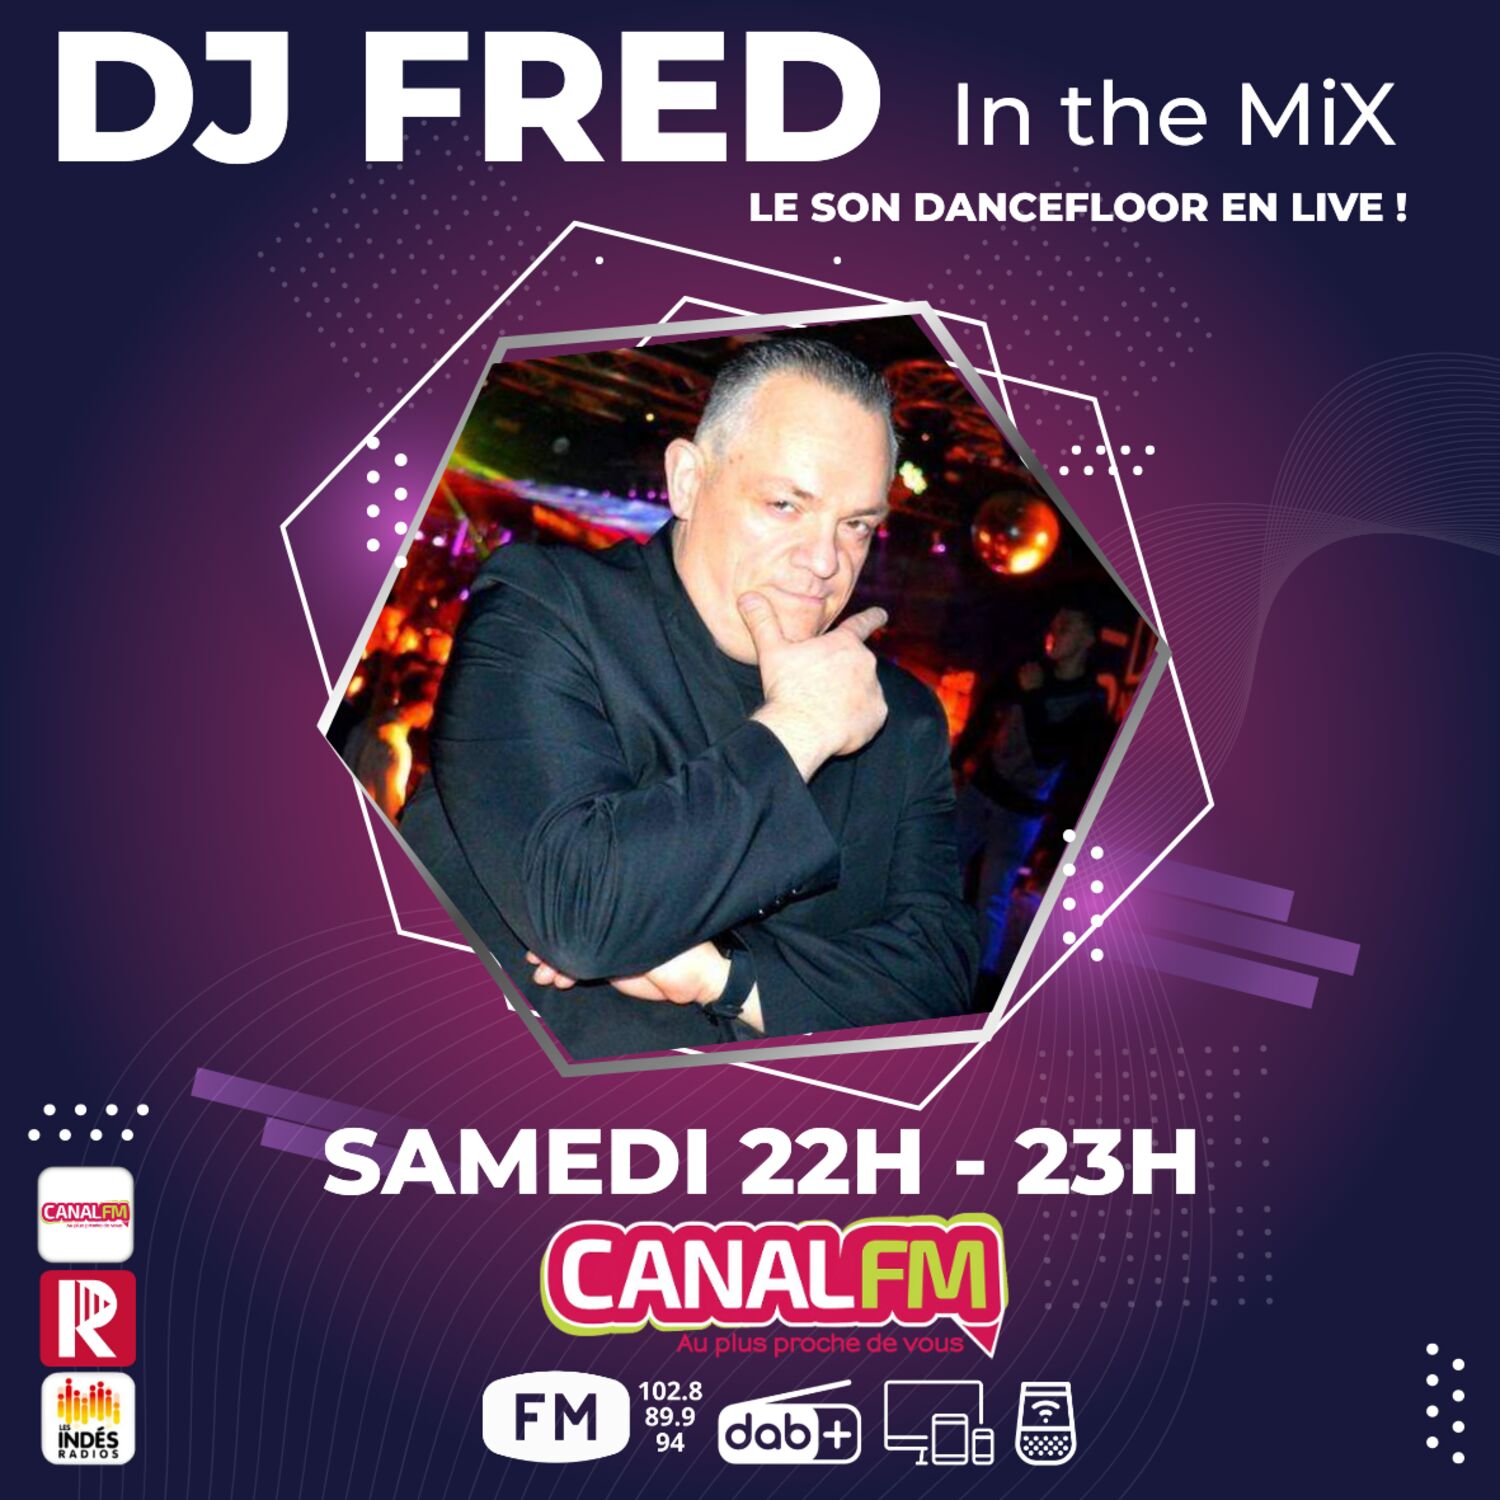 DJ FRED in the MiX